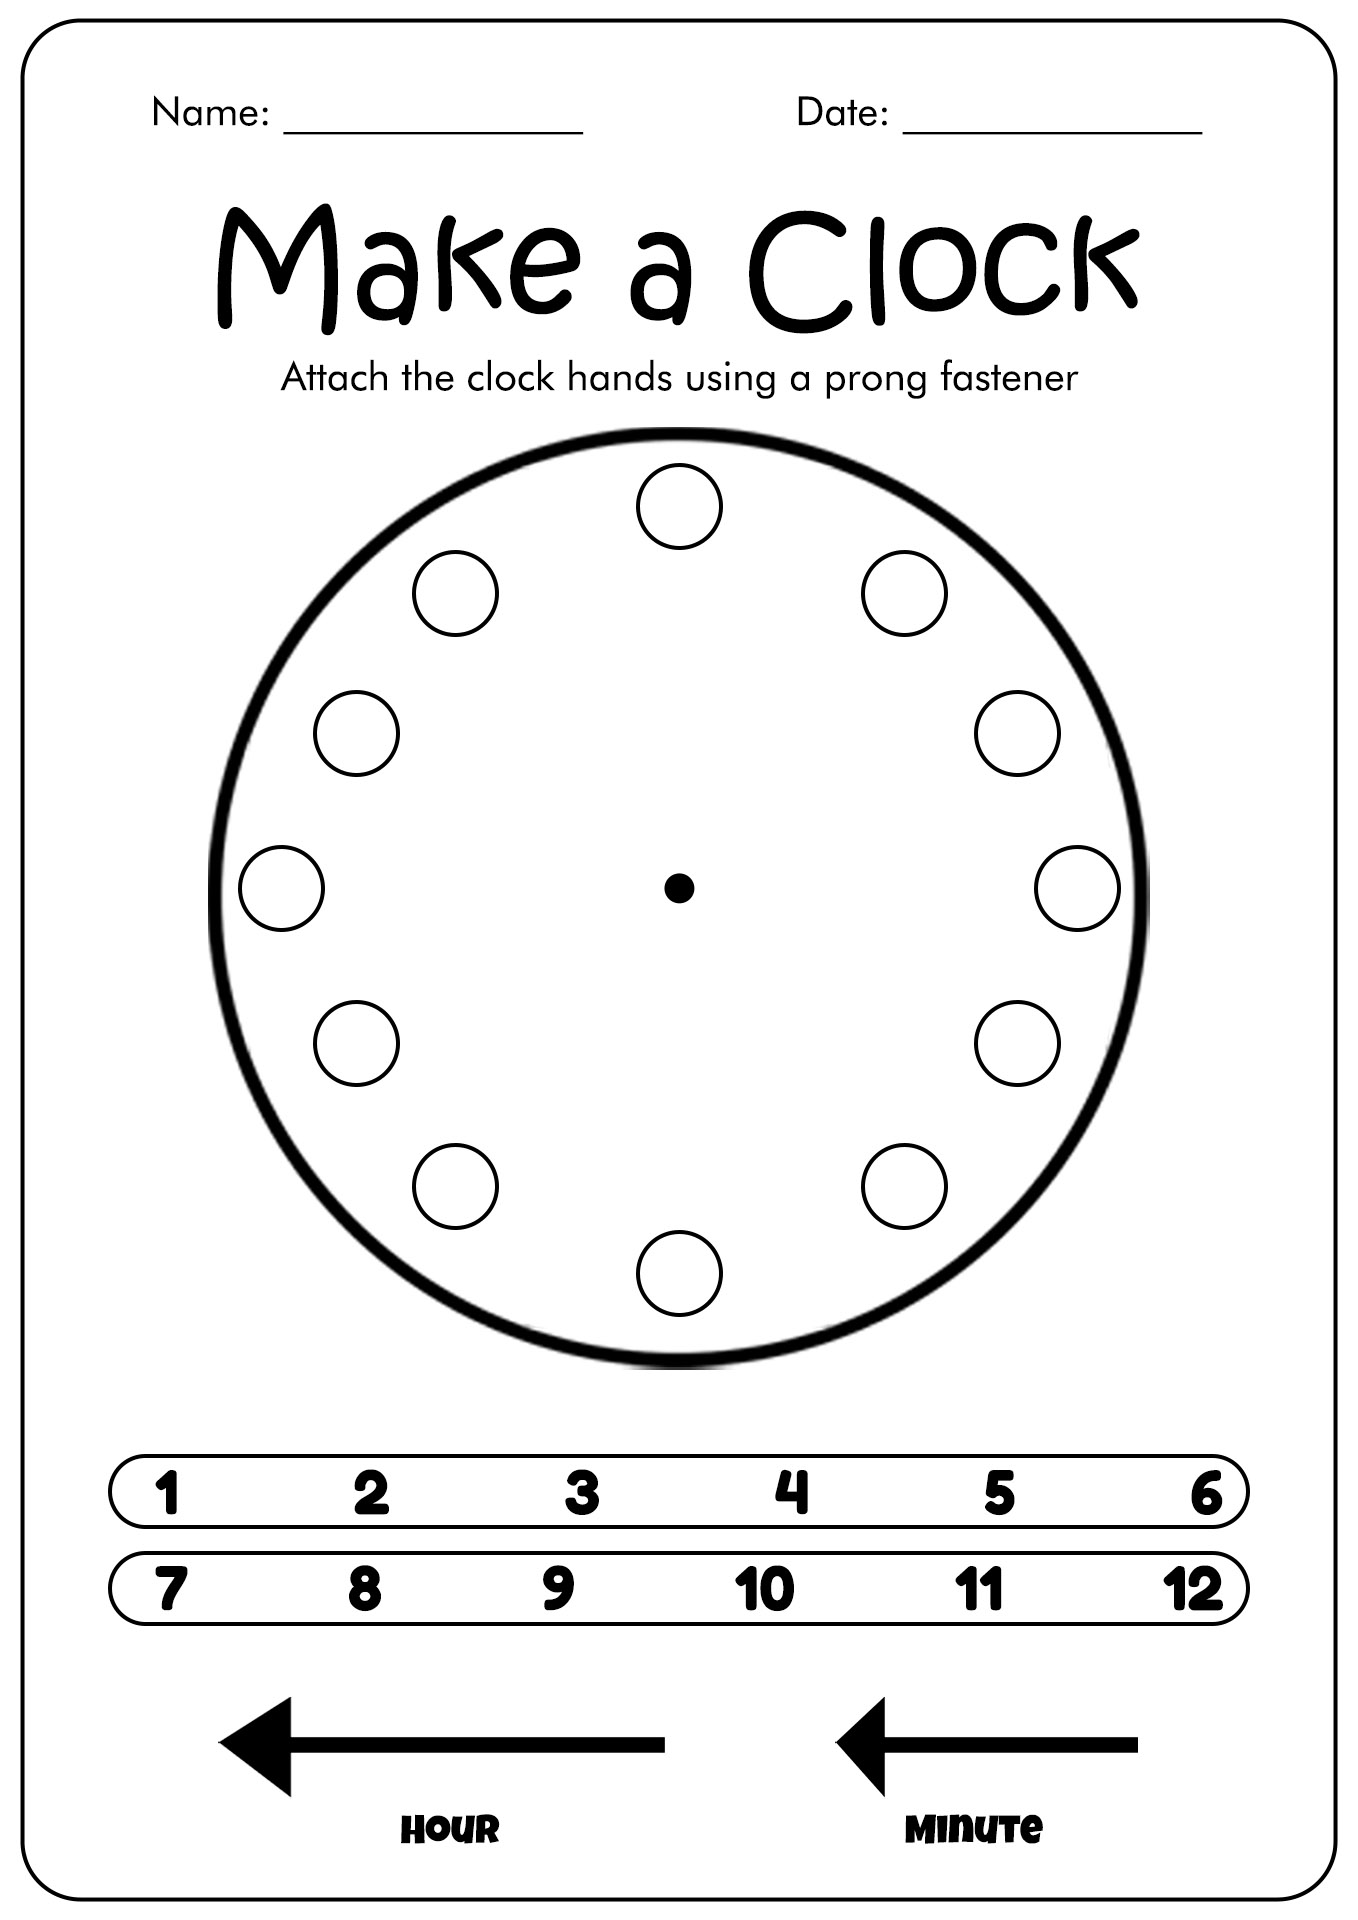 12-best-images-of-clock-cut-out-worksheet-grouchy-ladybug-clock